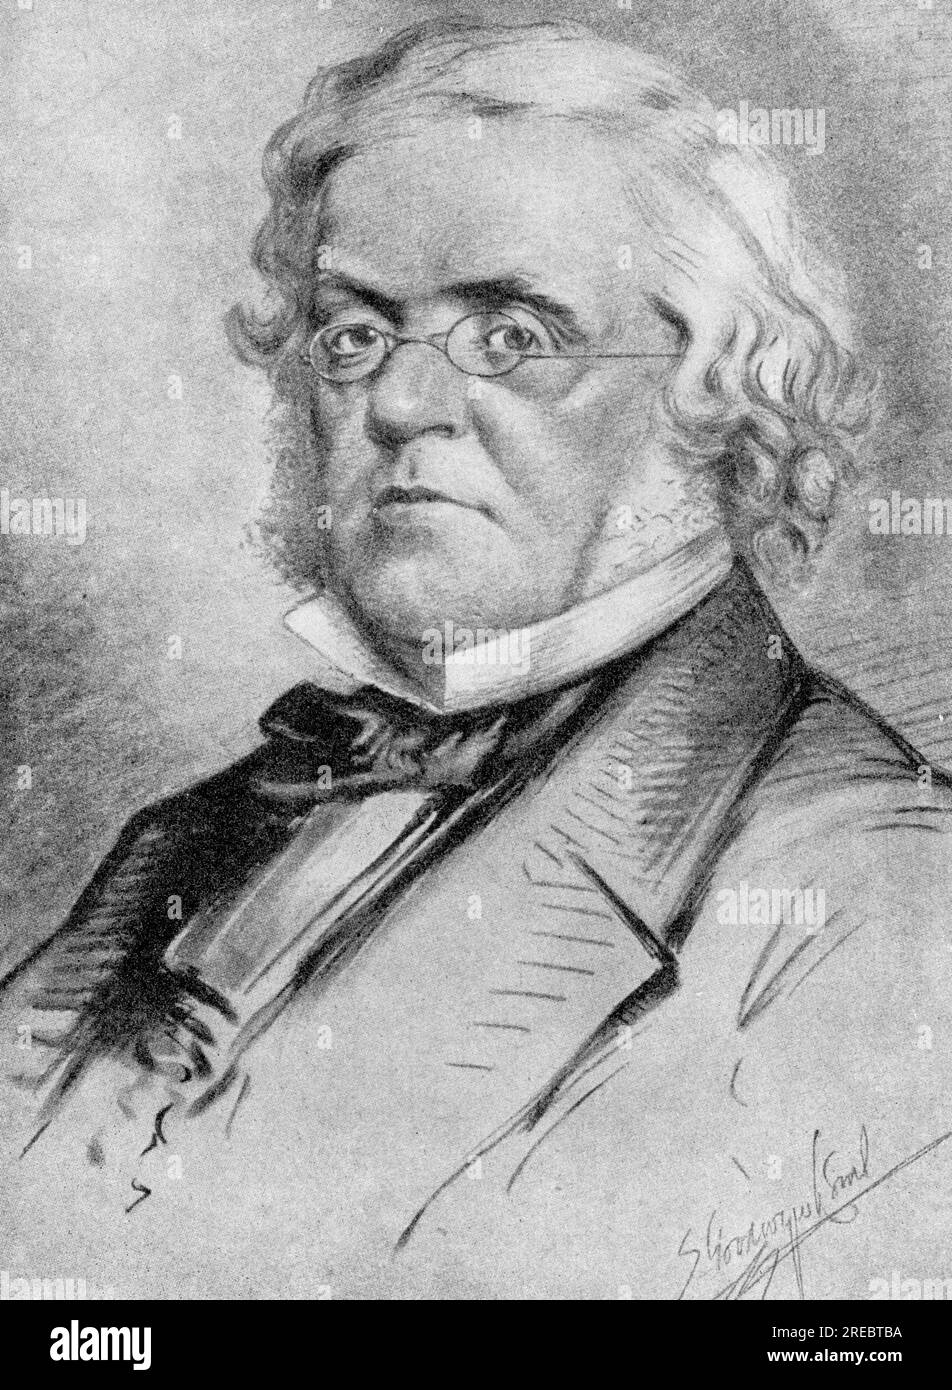 Thackeray, William Makepeace, 18.7.1811 - 24.12.1863, British writer, print based on drawing, circa 1860, ARTIST'S COPYRIGHT HAS NOT TO BE CLEARED Stock Photo